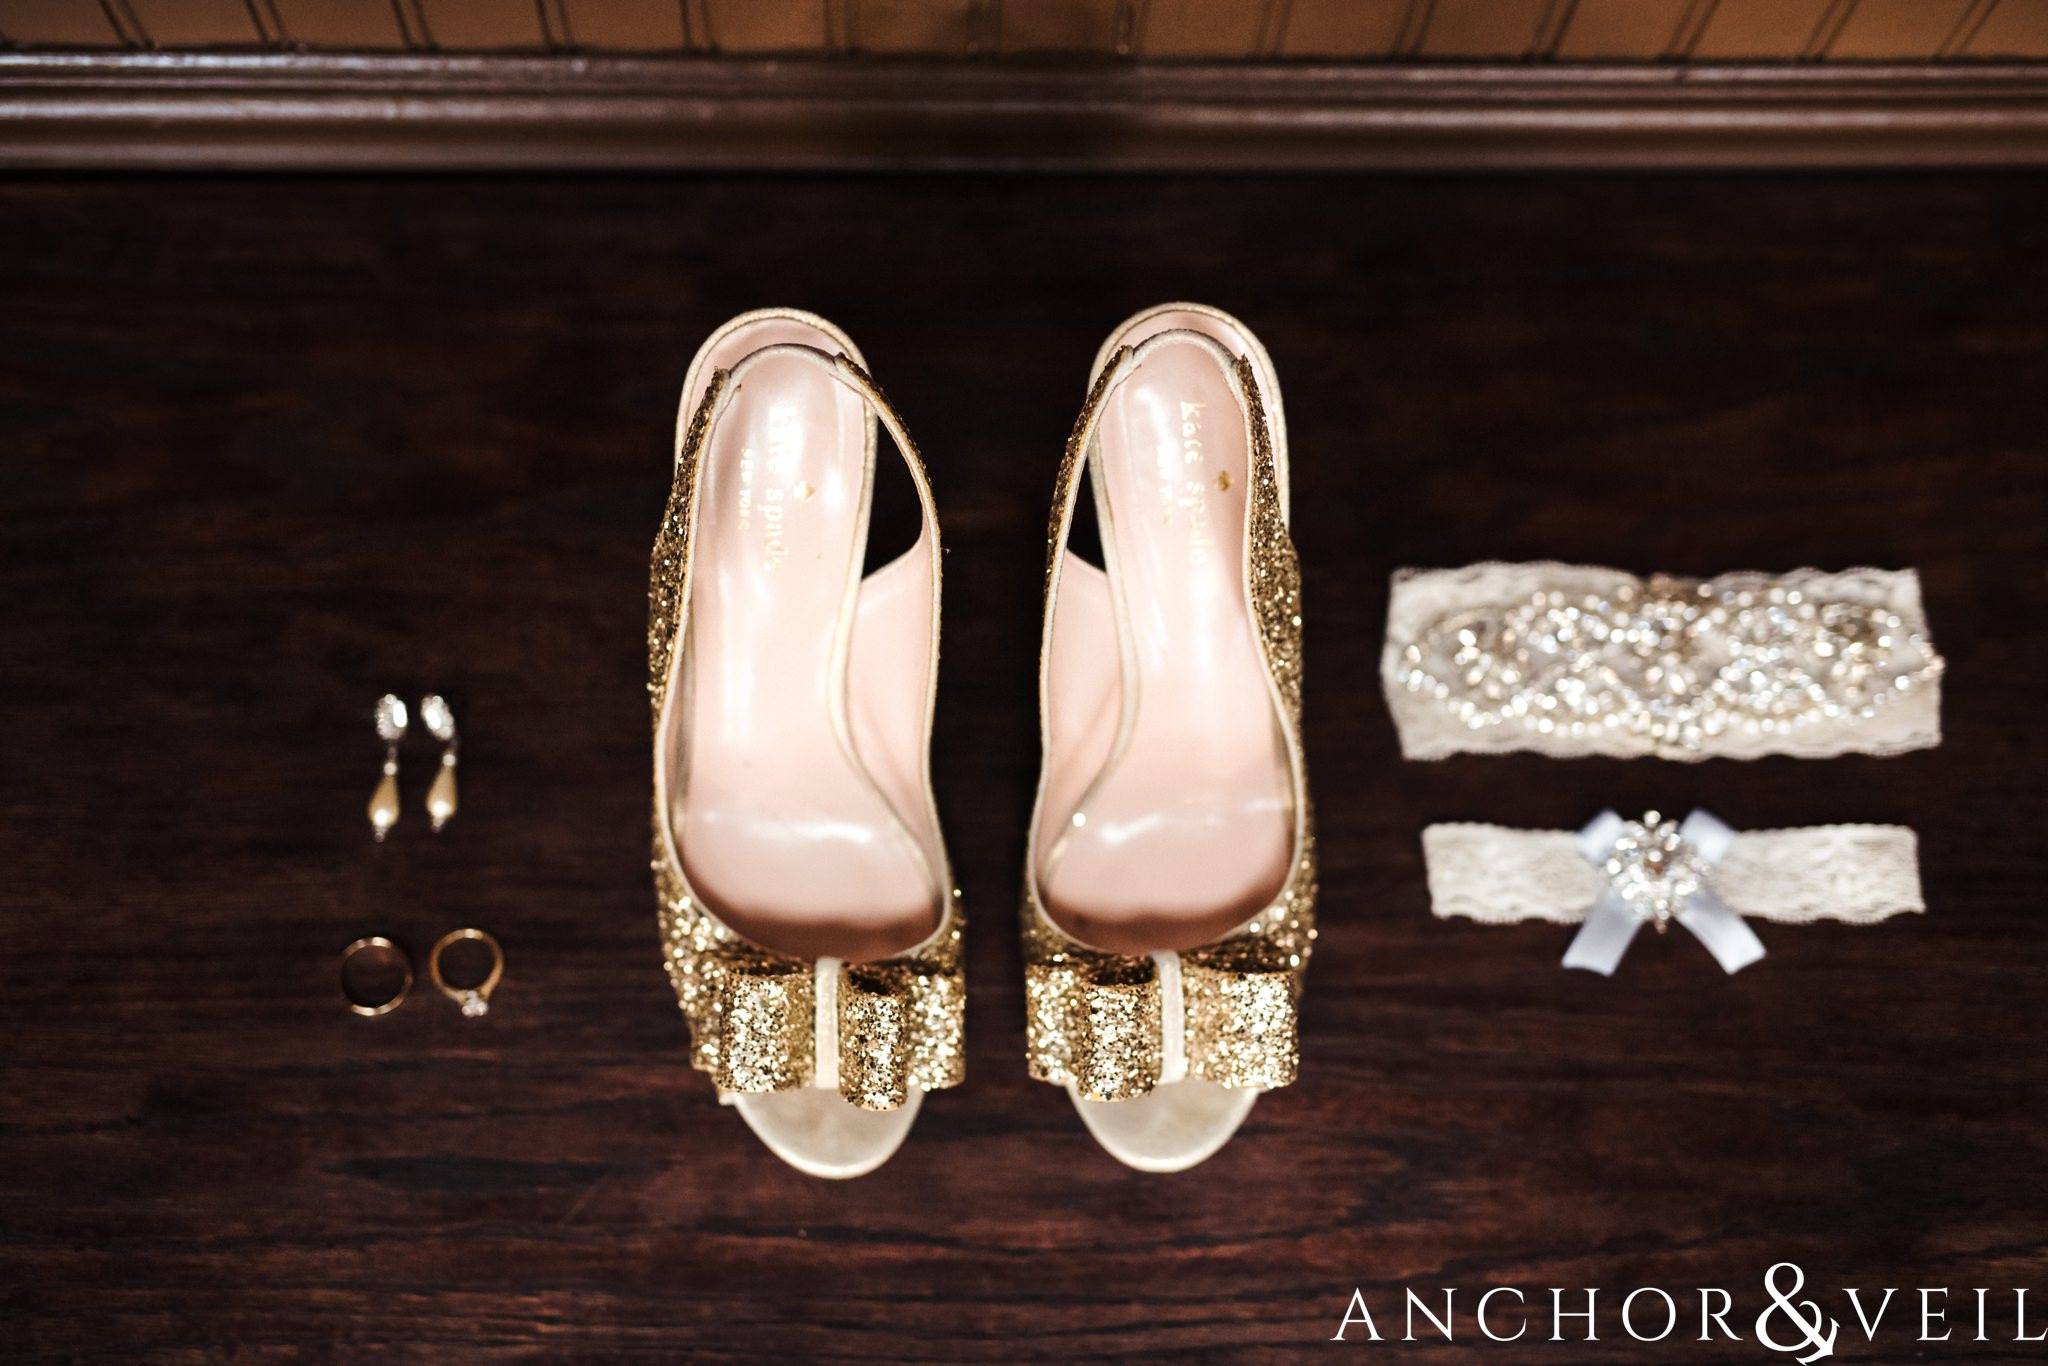 shoes and details during their Alabama Museum of Natural History Wedding